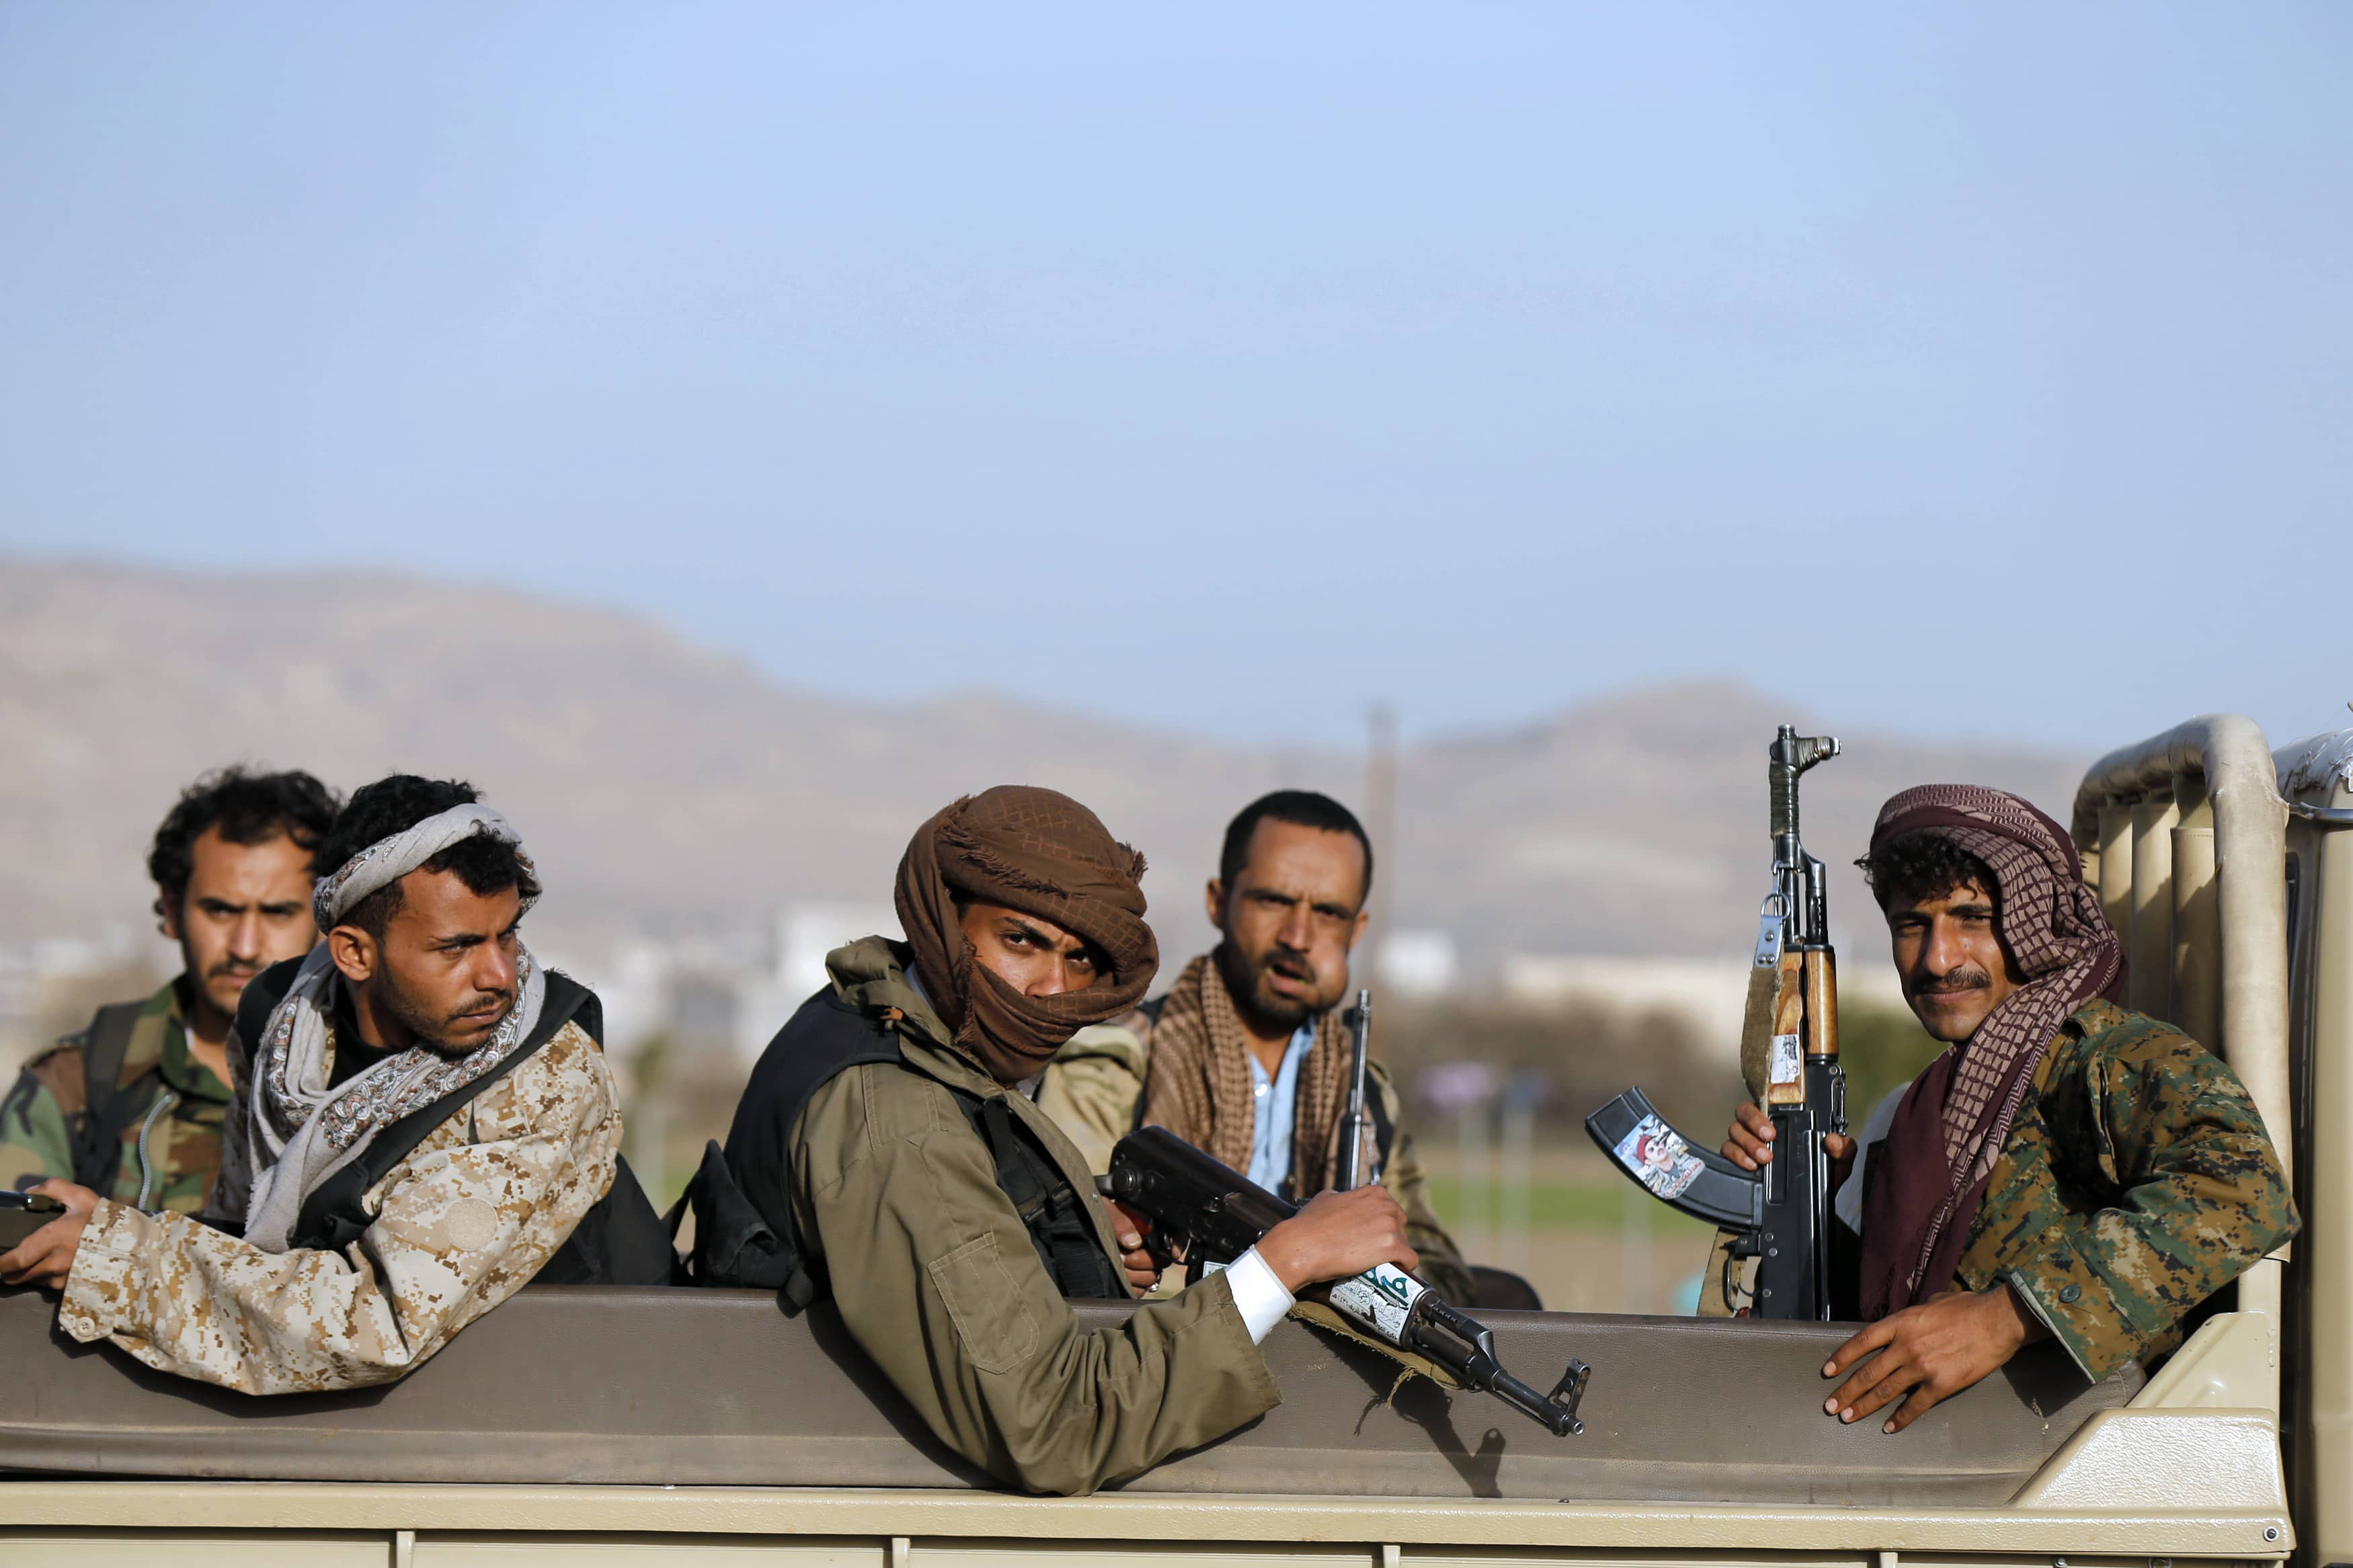 Houthi fighters ride a truck near the presidential palace in Sanaa January 22, 2015, REUTERS/Khaled Abdullah